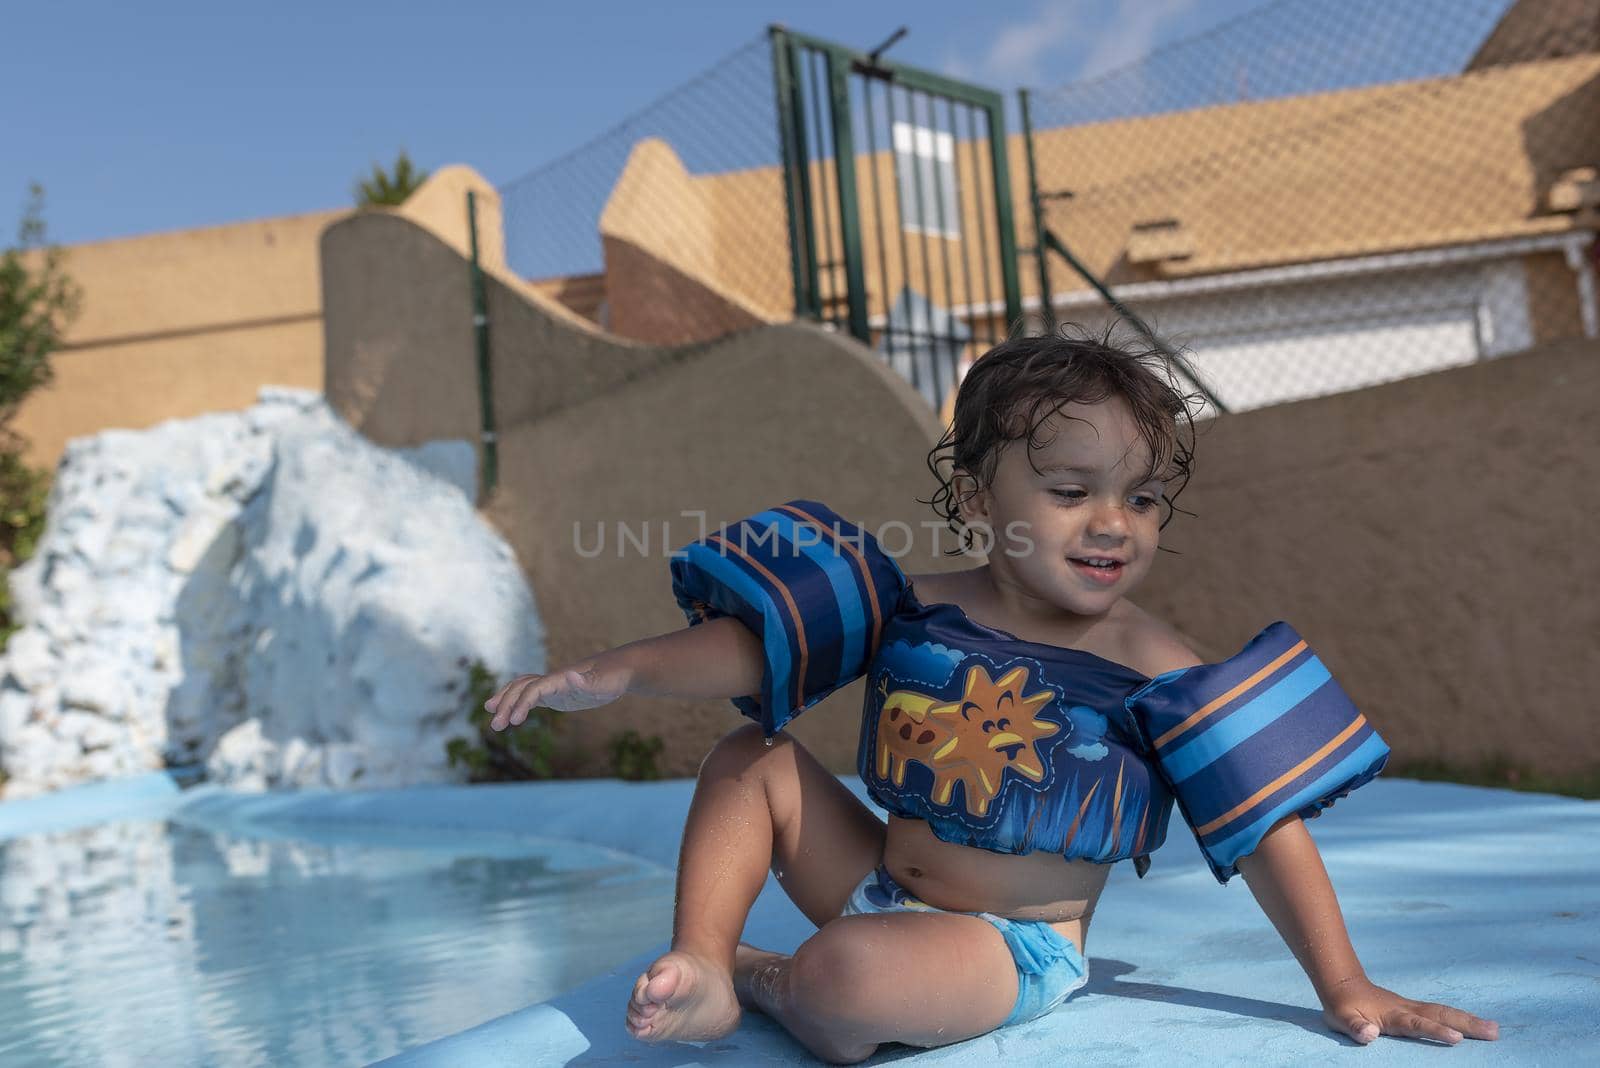 Toddler plays in the pool with children's floats. Summer arrives in the northern hemisphere